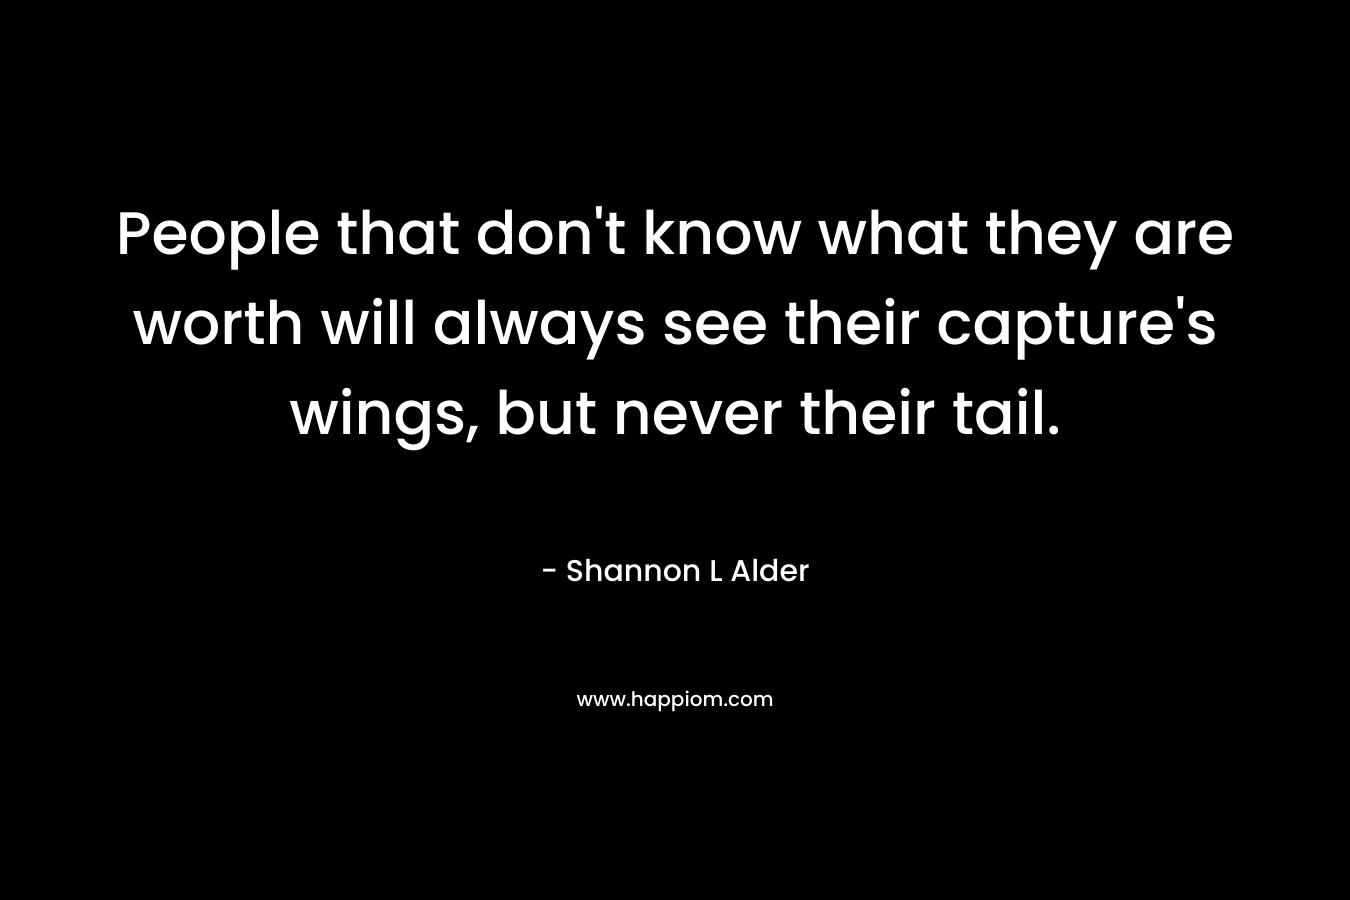 People that don’t know what they are worth will always see their capture’s wings, but never their tail. – Shannon L Alder